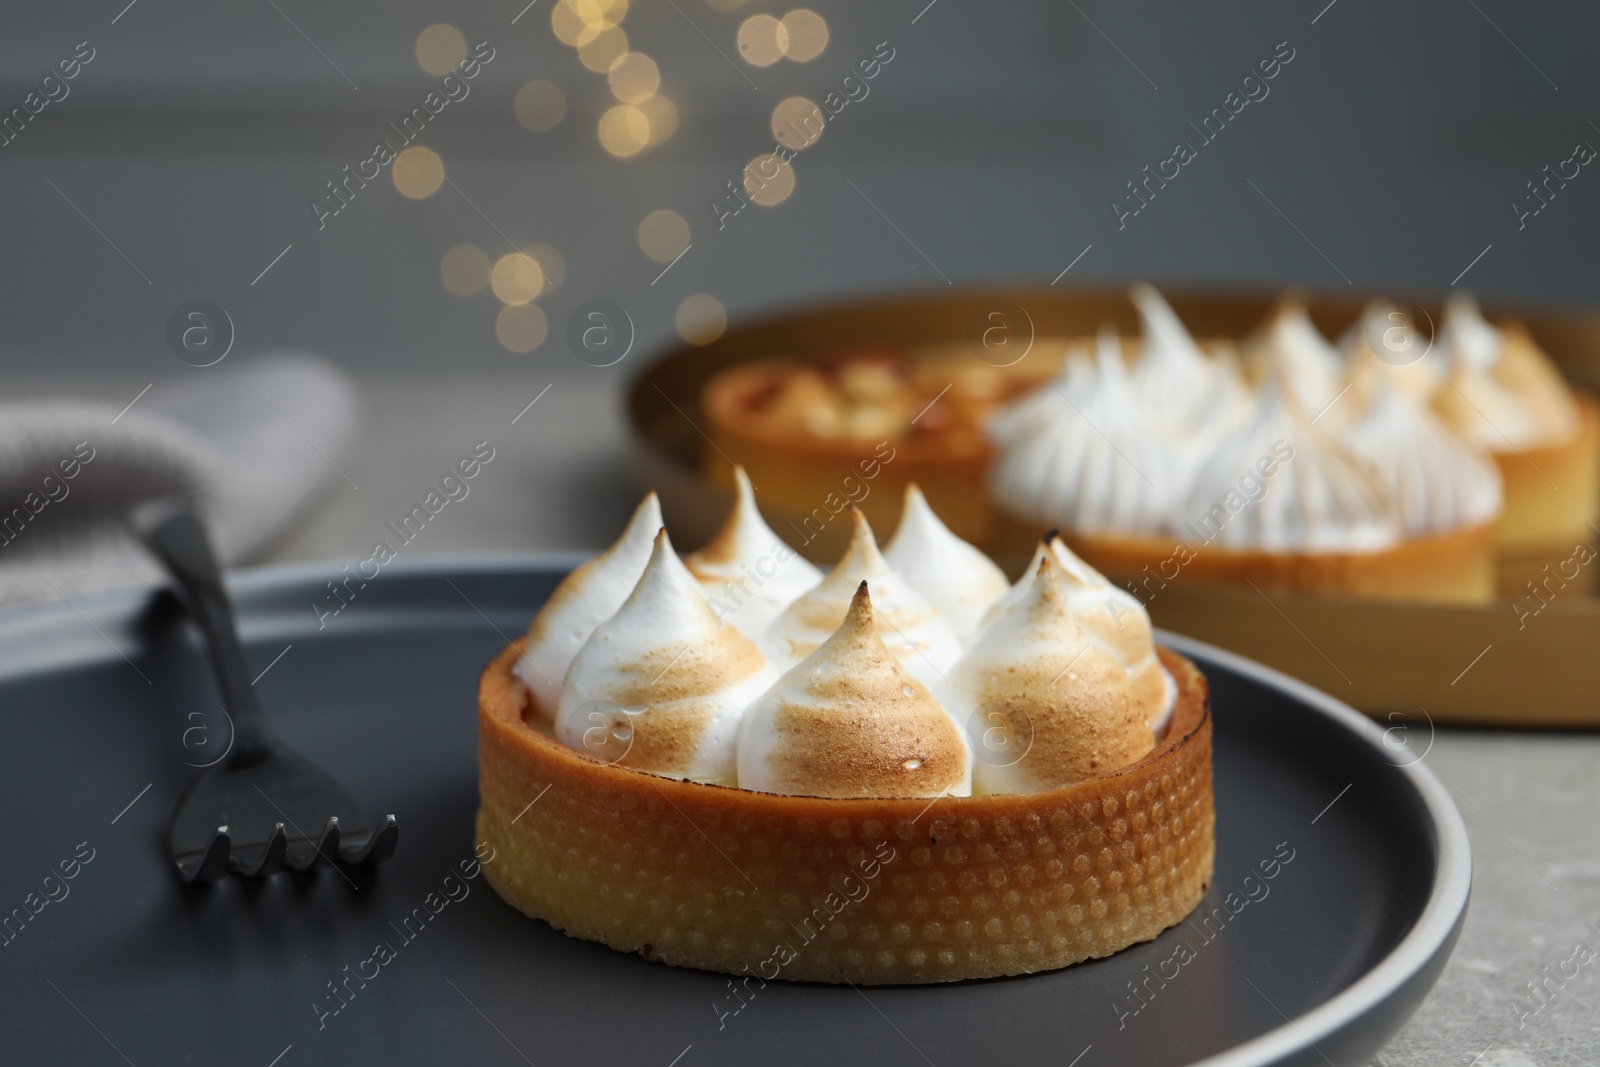 Photo of Tartlet with meringue on grey table against blurred festive lights, closeup. Delicious dessert